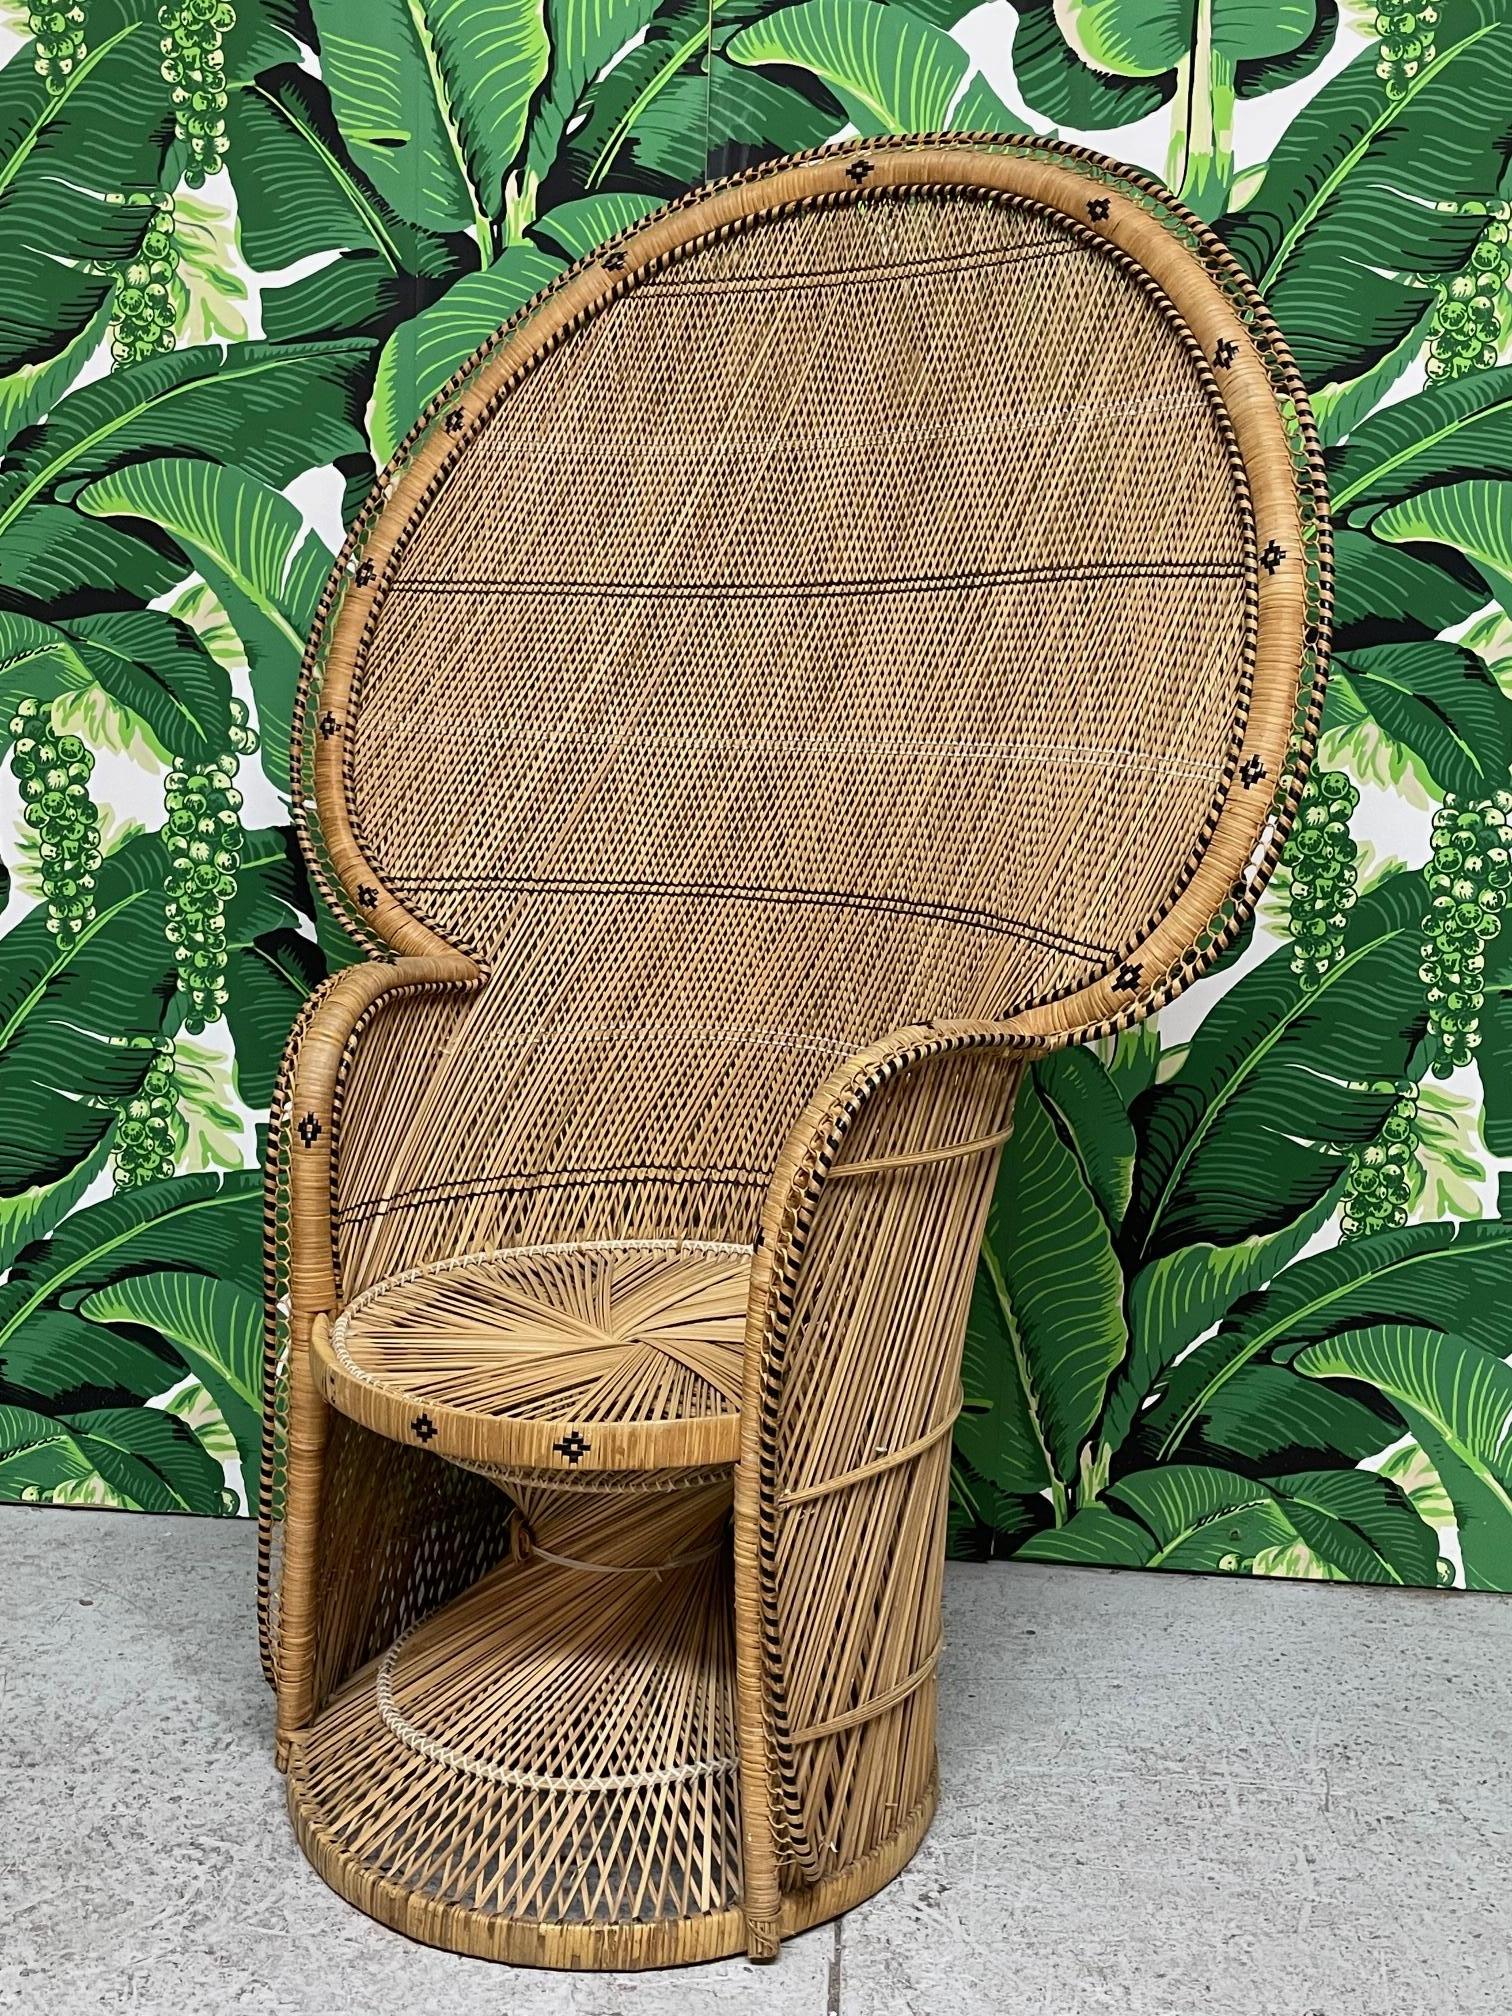 Vintage wicker peacock chair features a fine cross-weave pattern and intricate black rattan detailing. Twisted design base and large fan back. Very good condition with only minor imperfections consistent with age.

 